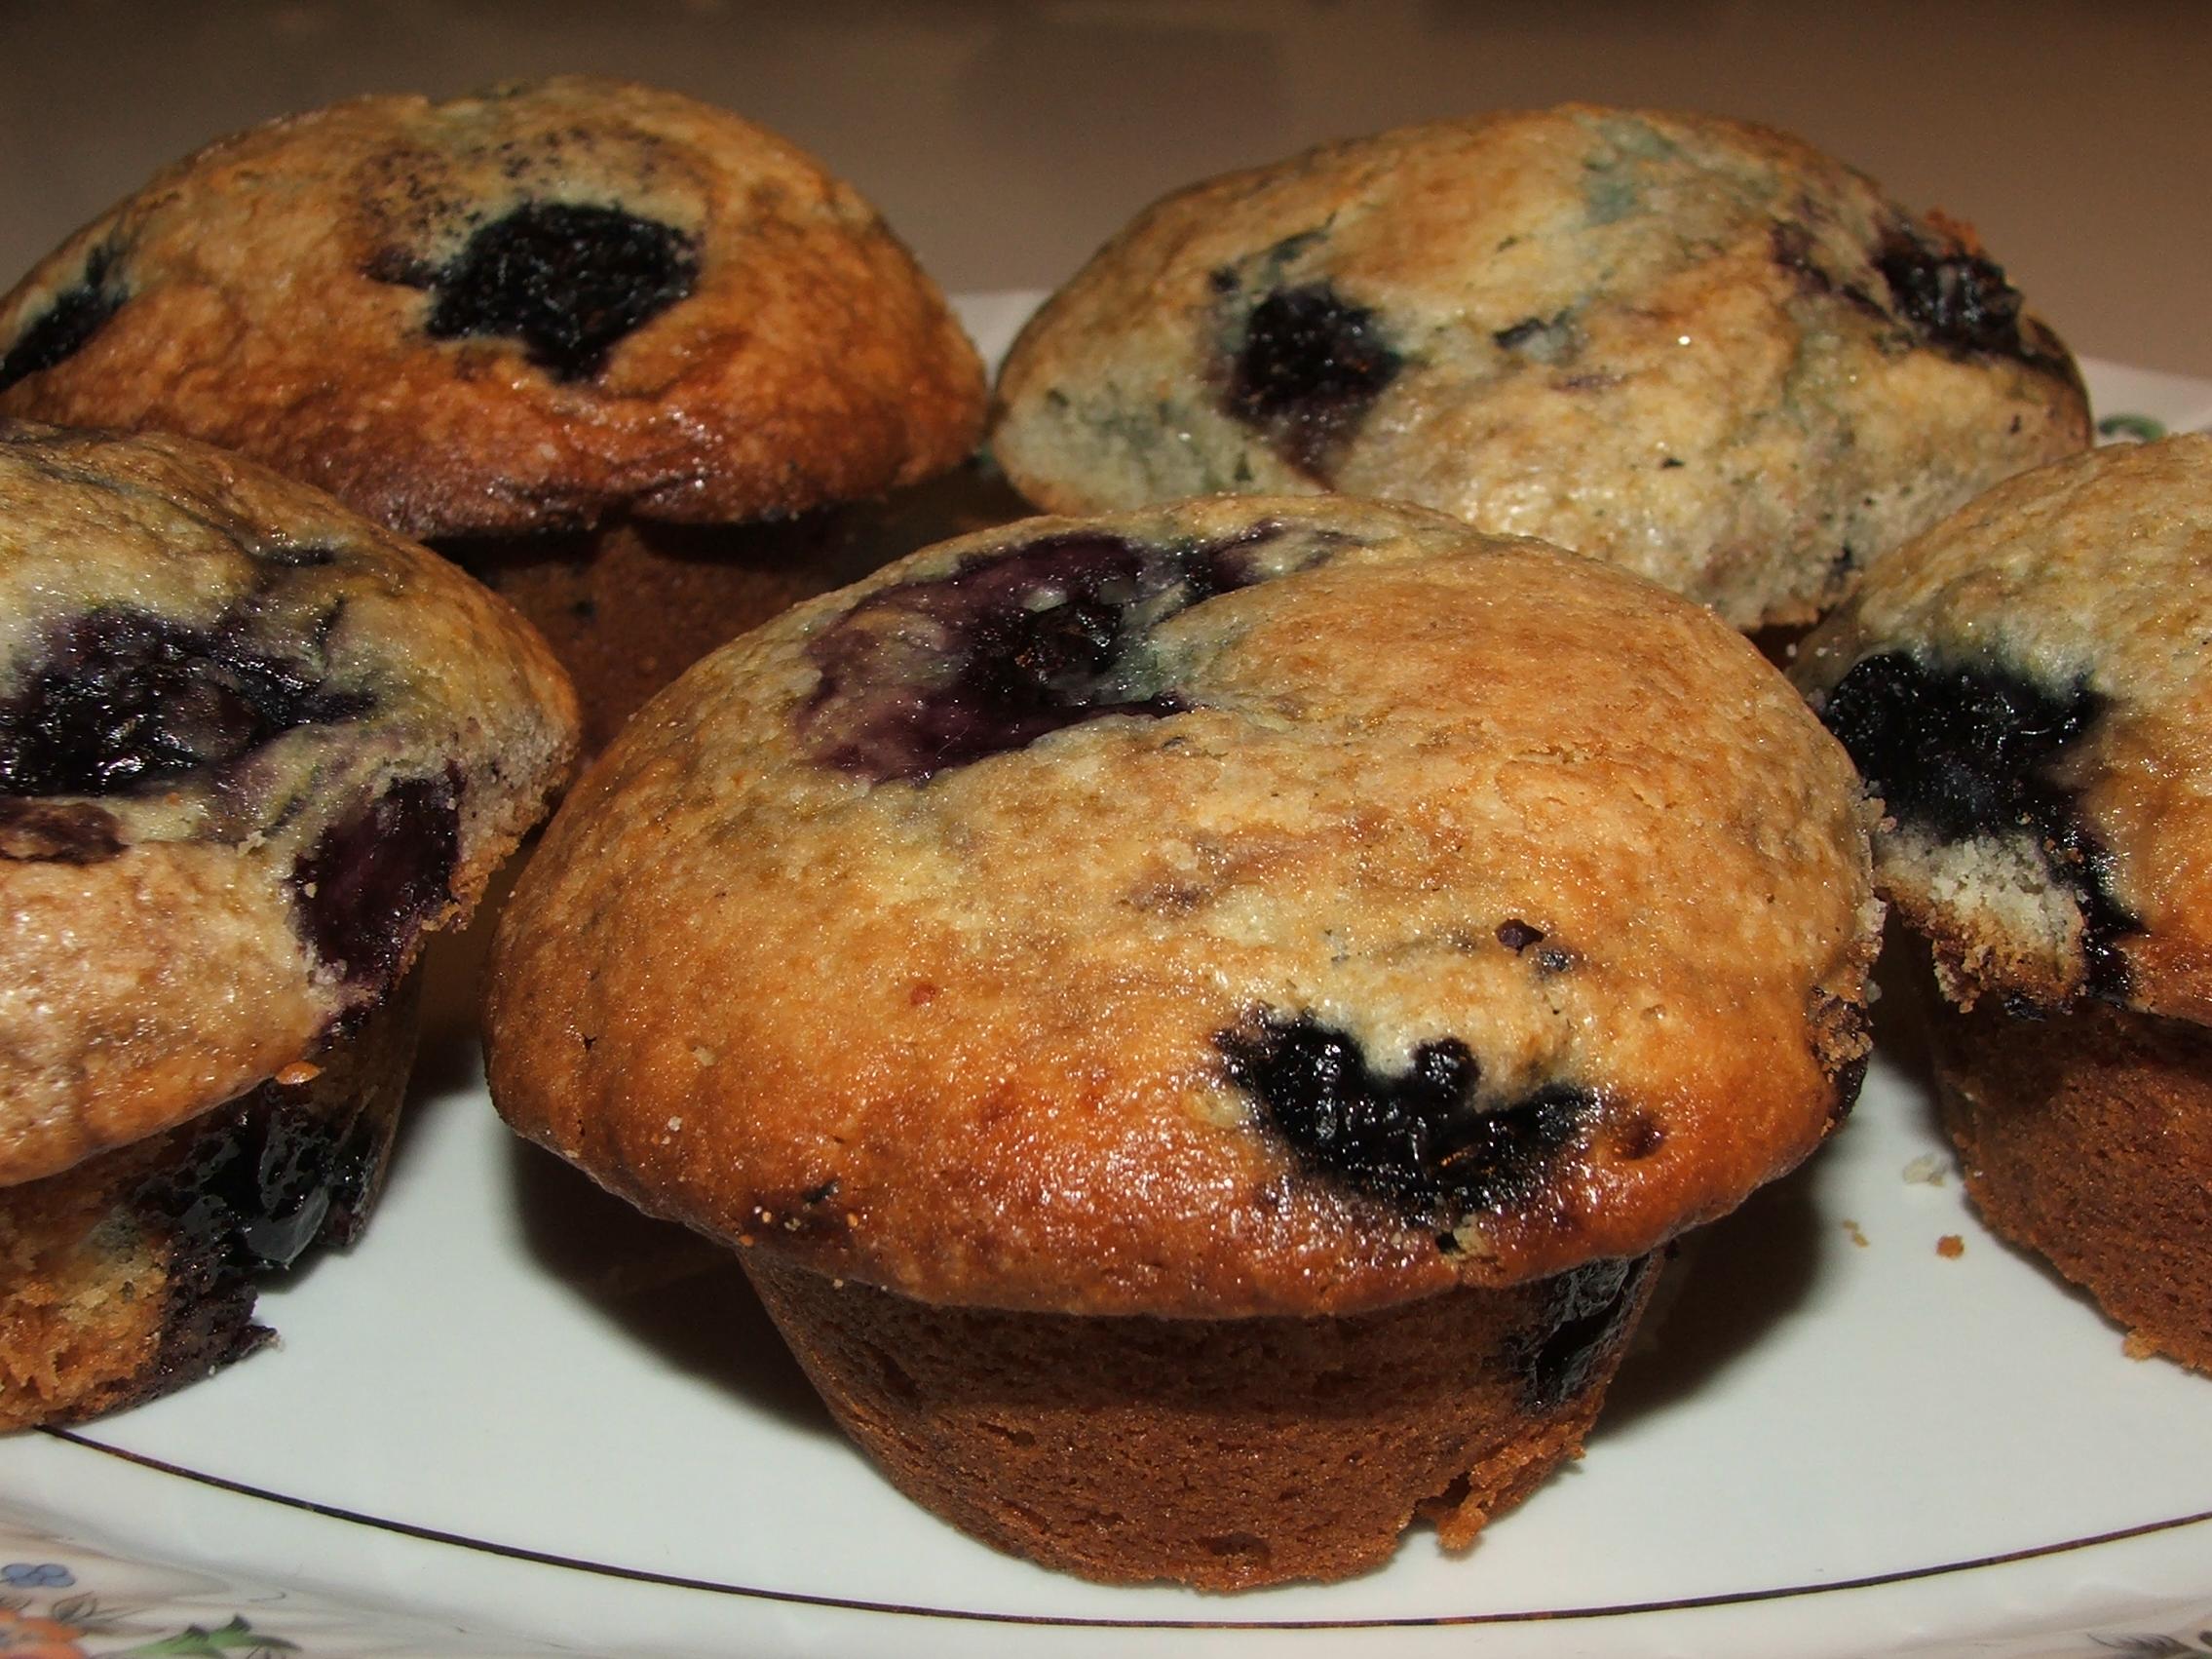  Muffin mania! These Blueberry Coffee Cake Muffins are sure to be a hit.